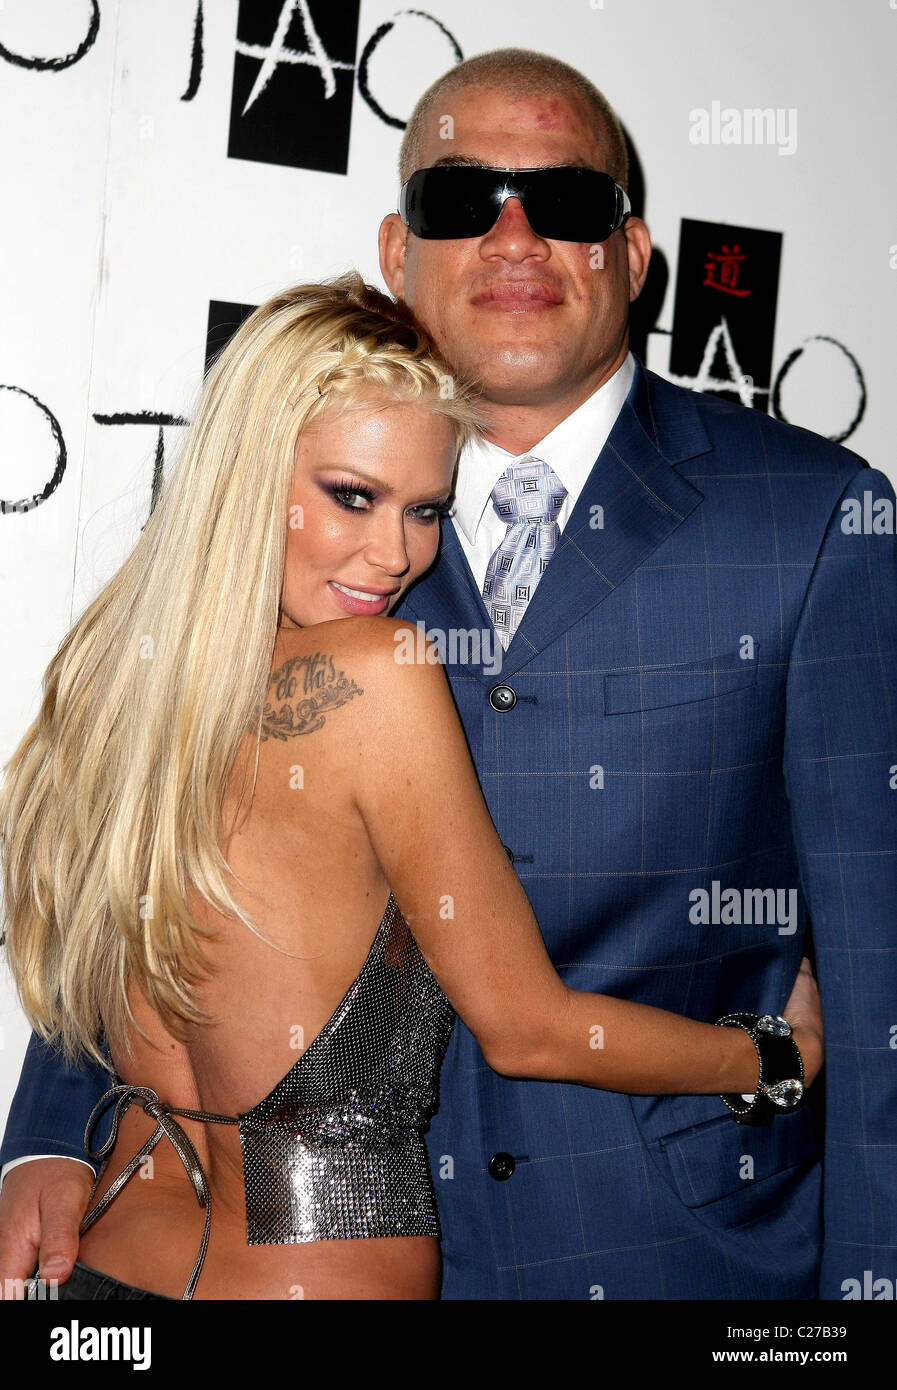 Ufc fighter tito ortiz arrested for beating porn star wife jenna jameson